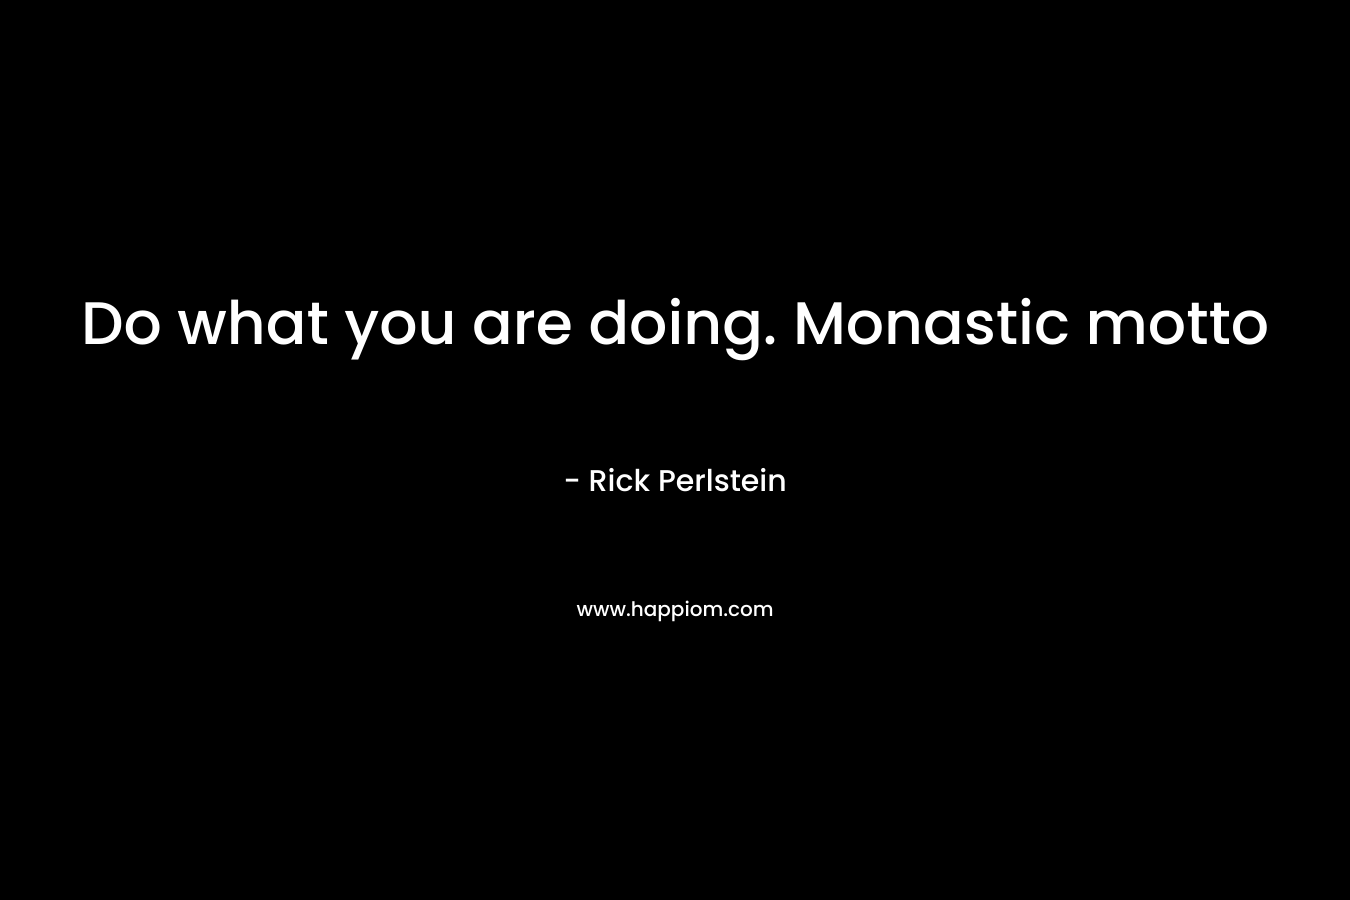 Do what you are doing. Monastic motto